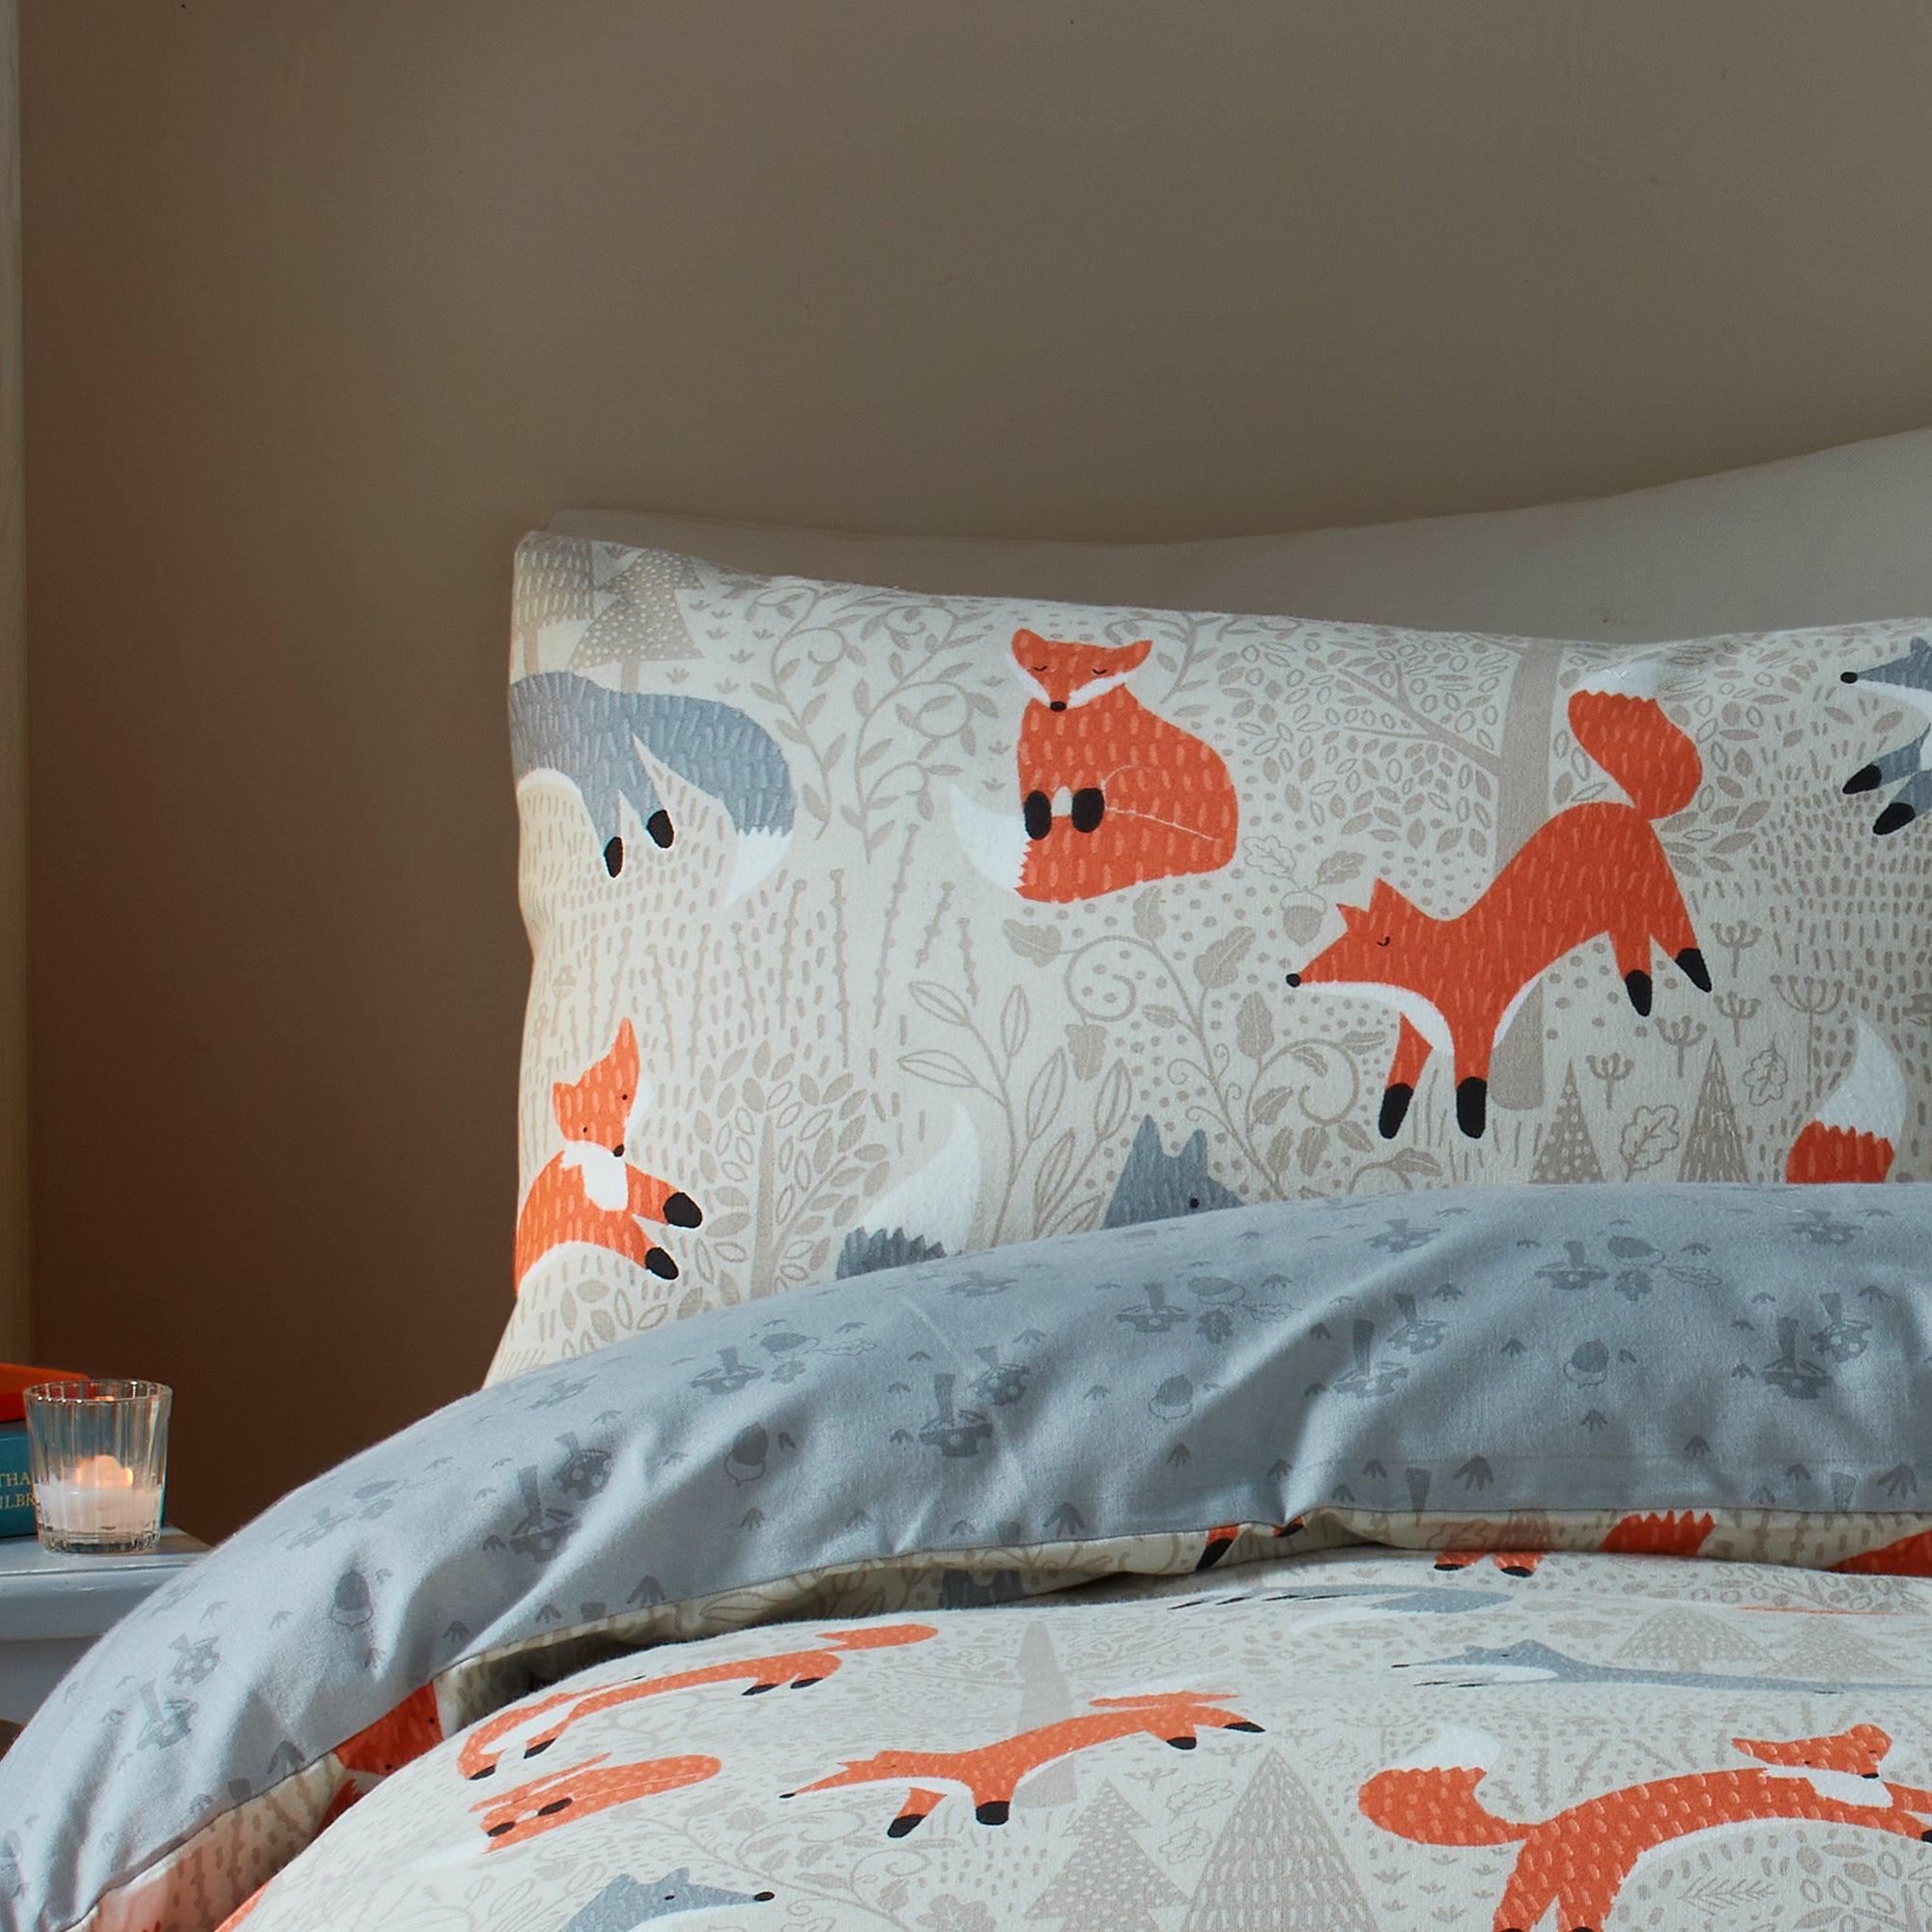 Duvet Cover Set Foraging Fox by Fusion Snug in Natural